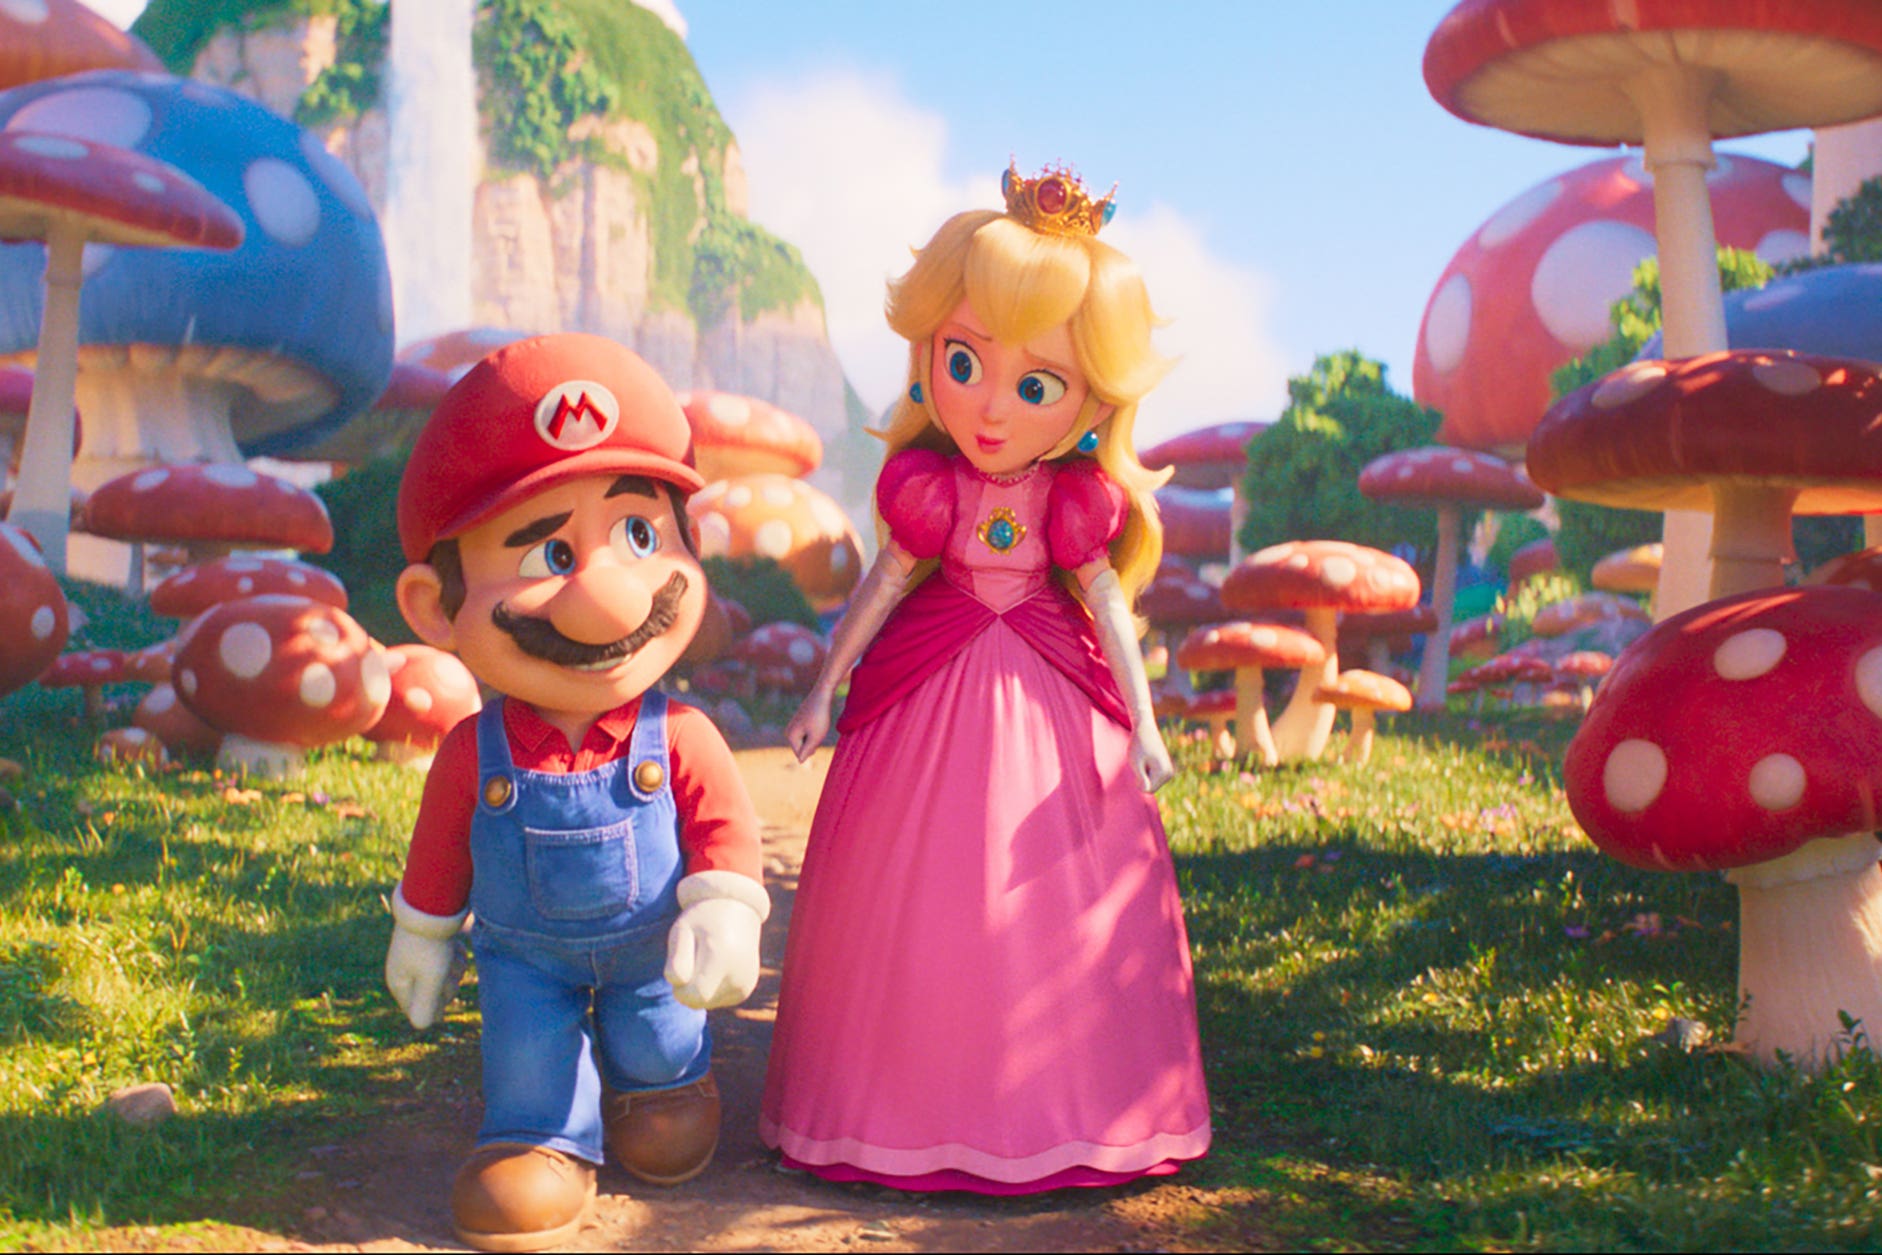 When Is The Super Mario Bros. Movie Available To Stream? - Tech Advisor